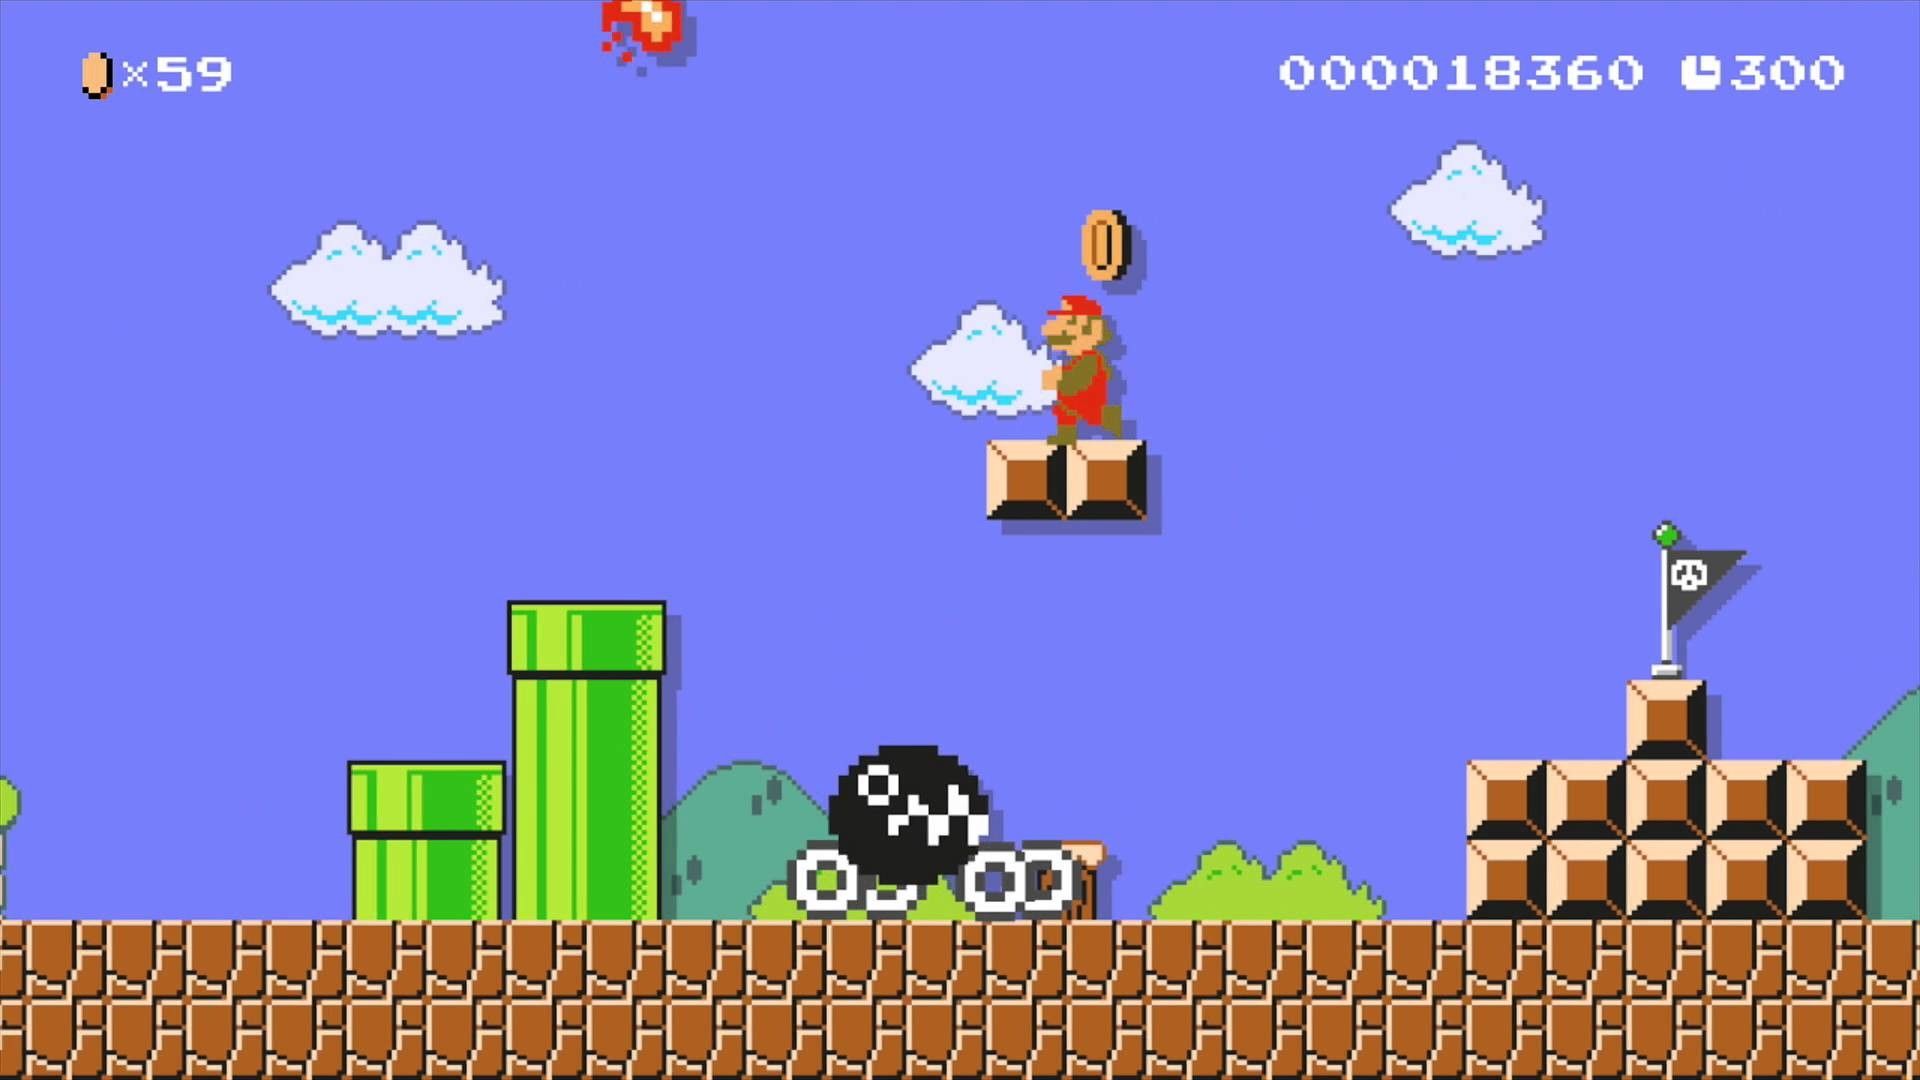 Super Mario Bros. is one of the most iconic video games of all time. - 